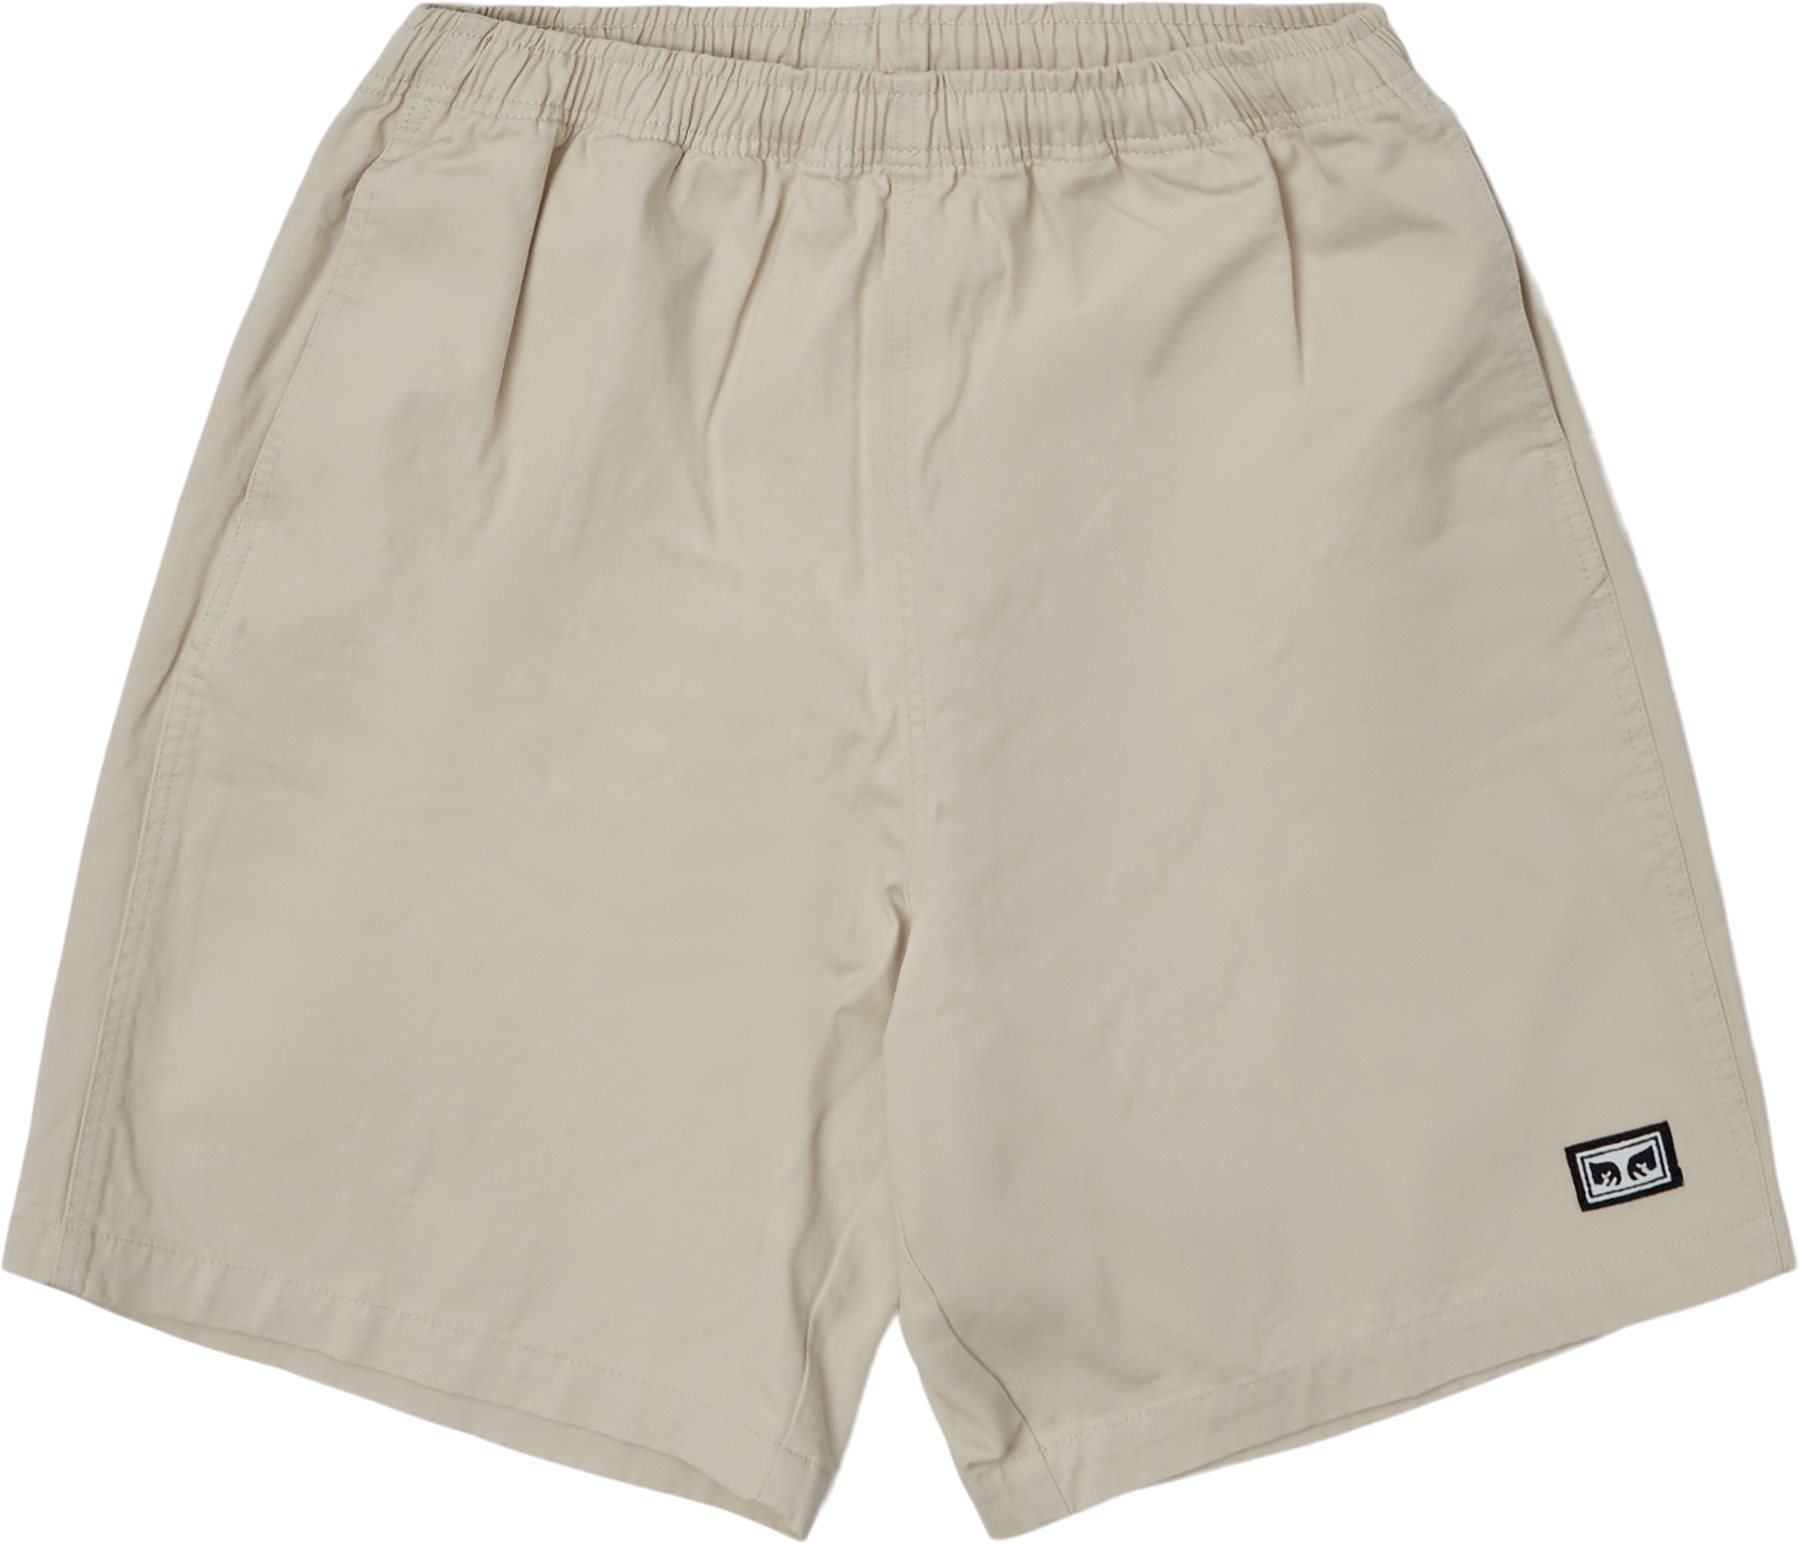 Relaxed Twill Shorts - Shorts - Regular fit - Sand